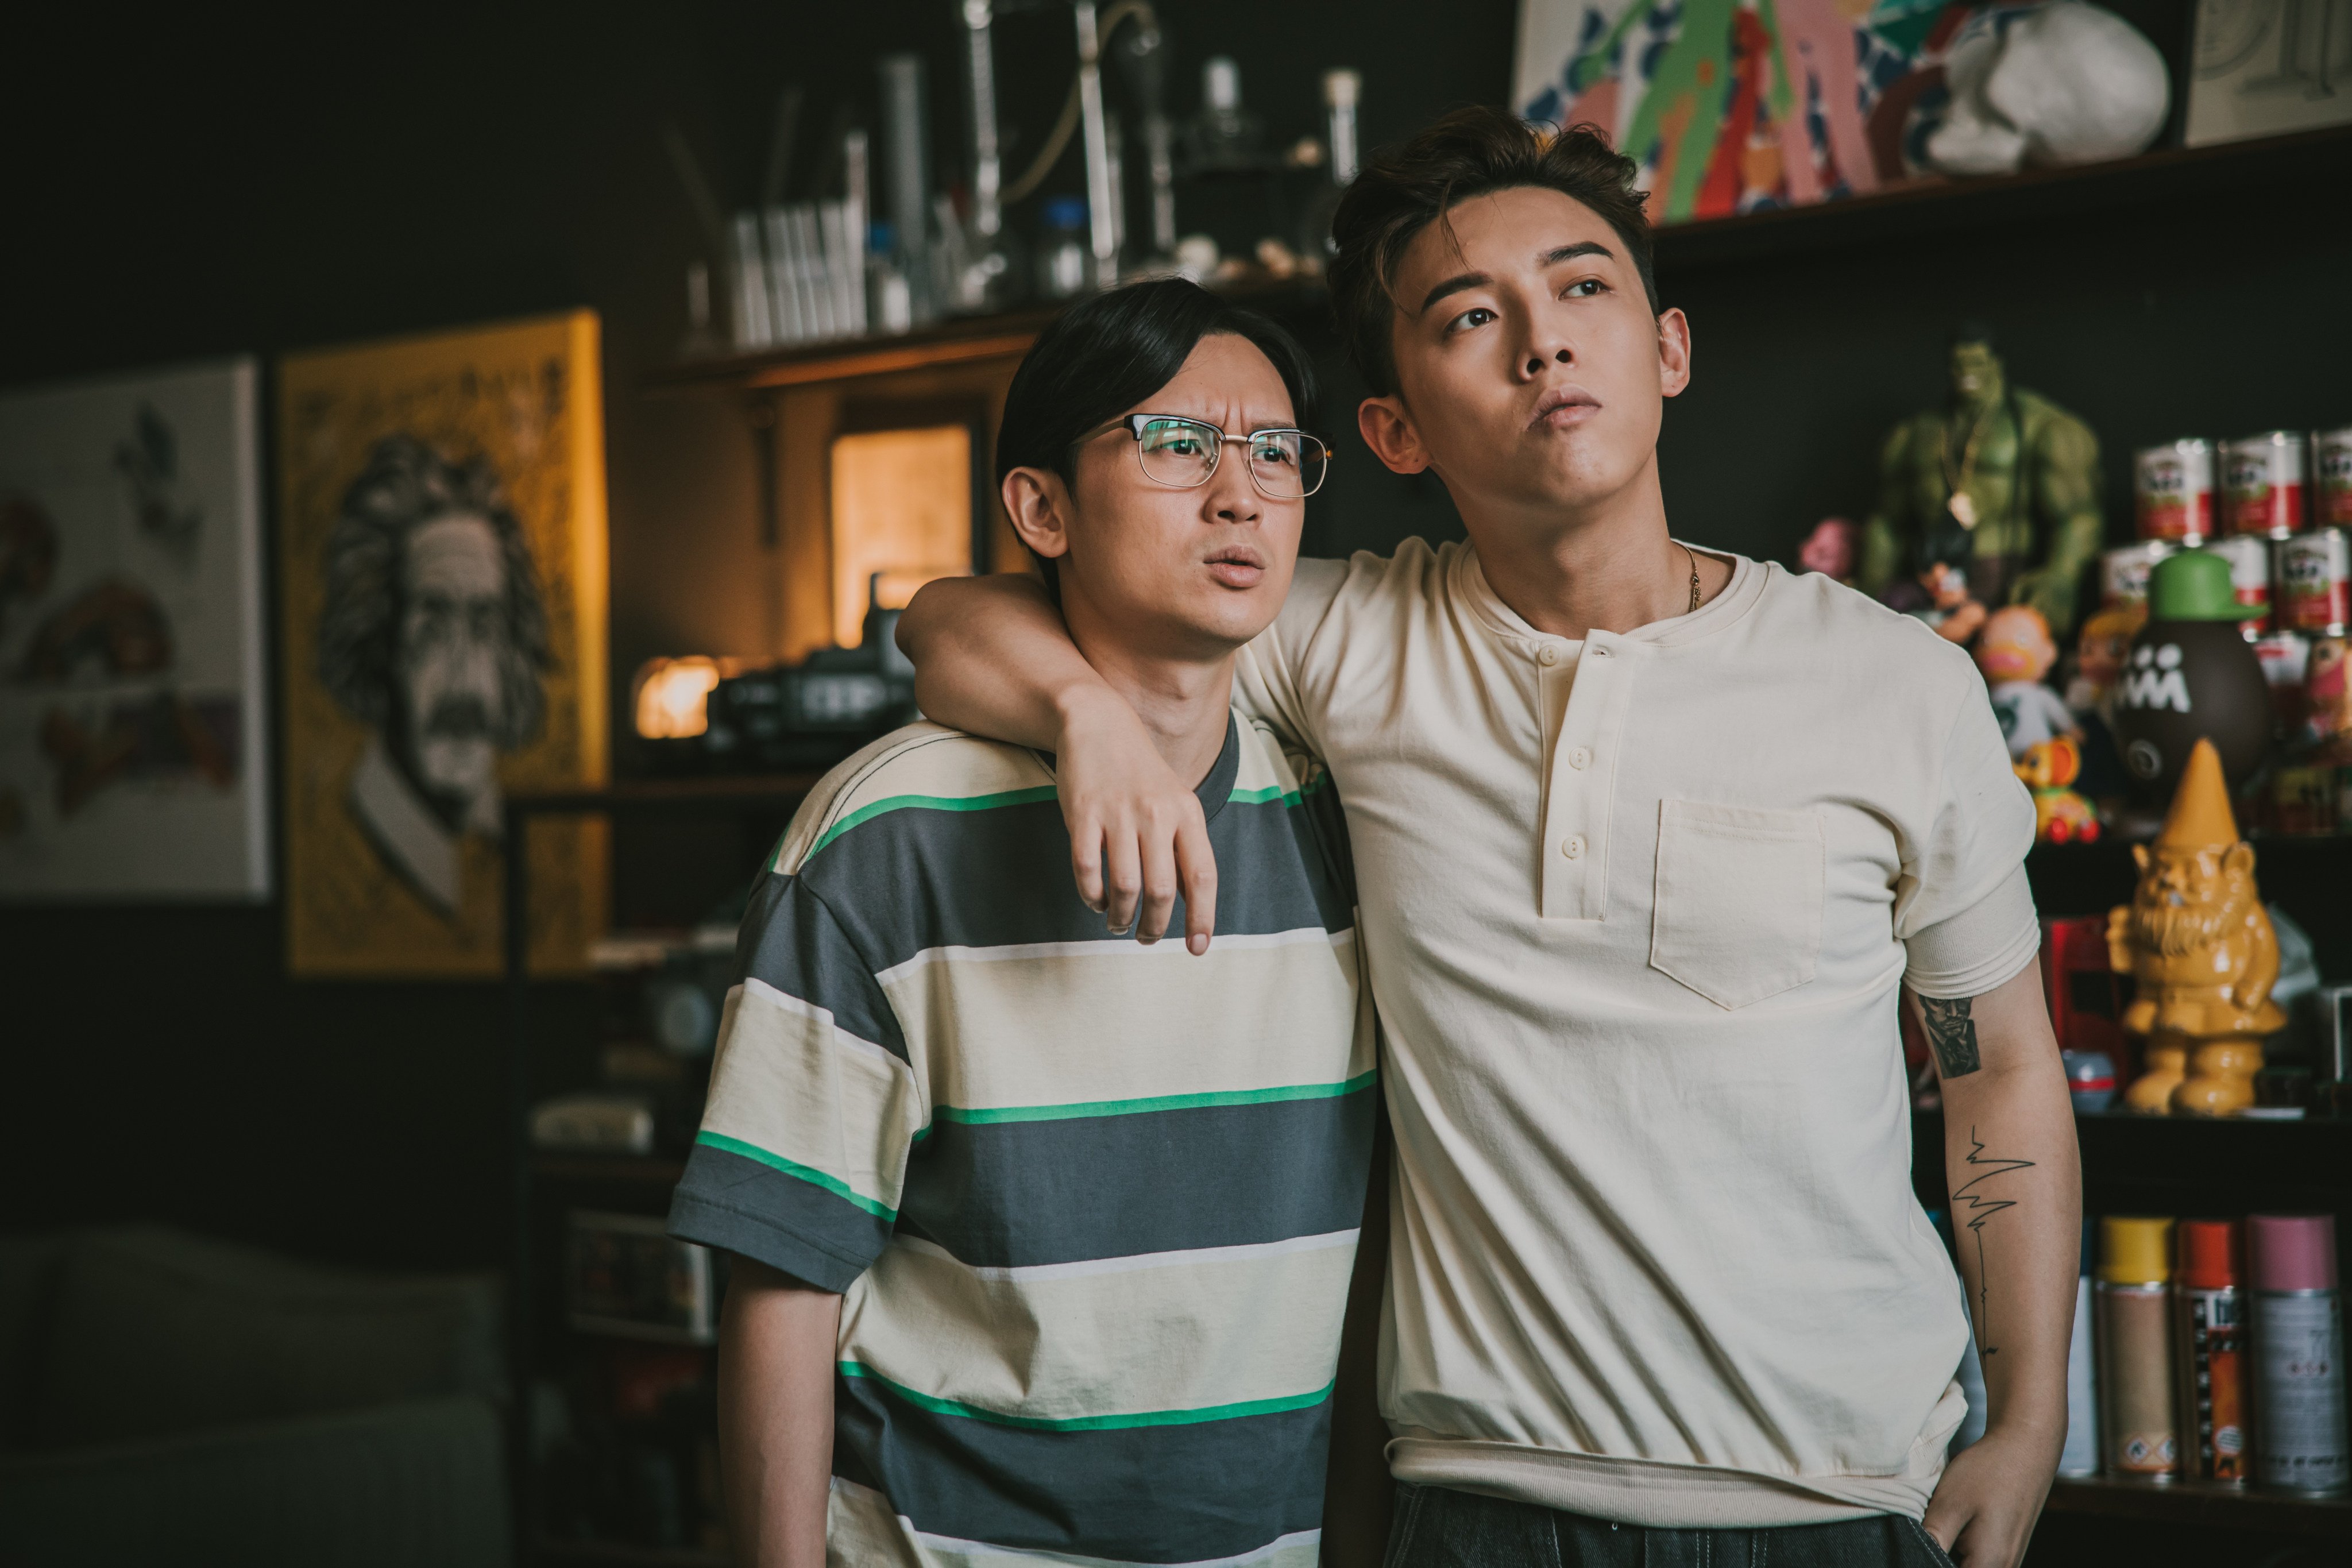 Ling Man-lung (left) and Michael Cheung in a still from “One Night at School”.